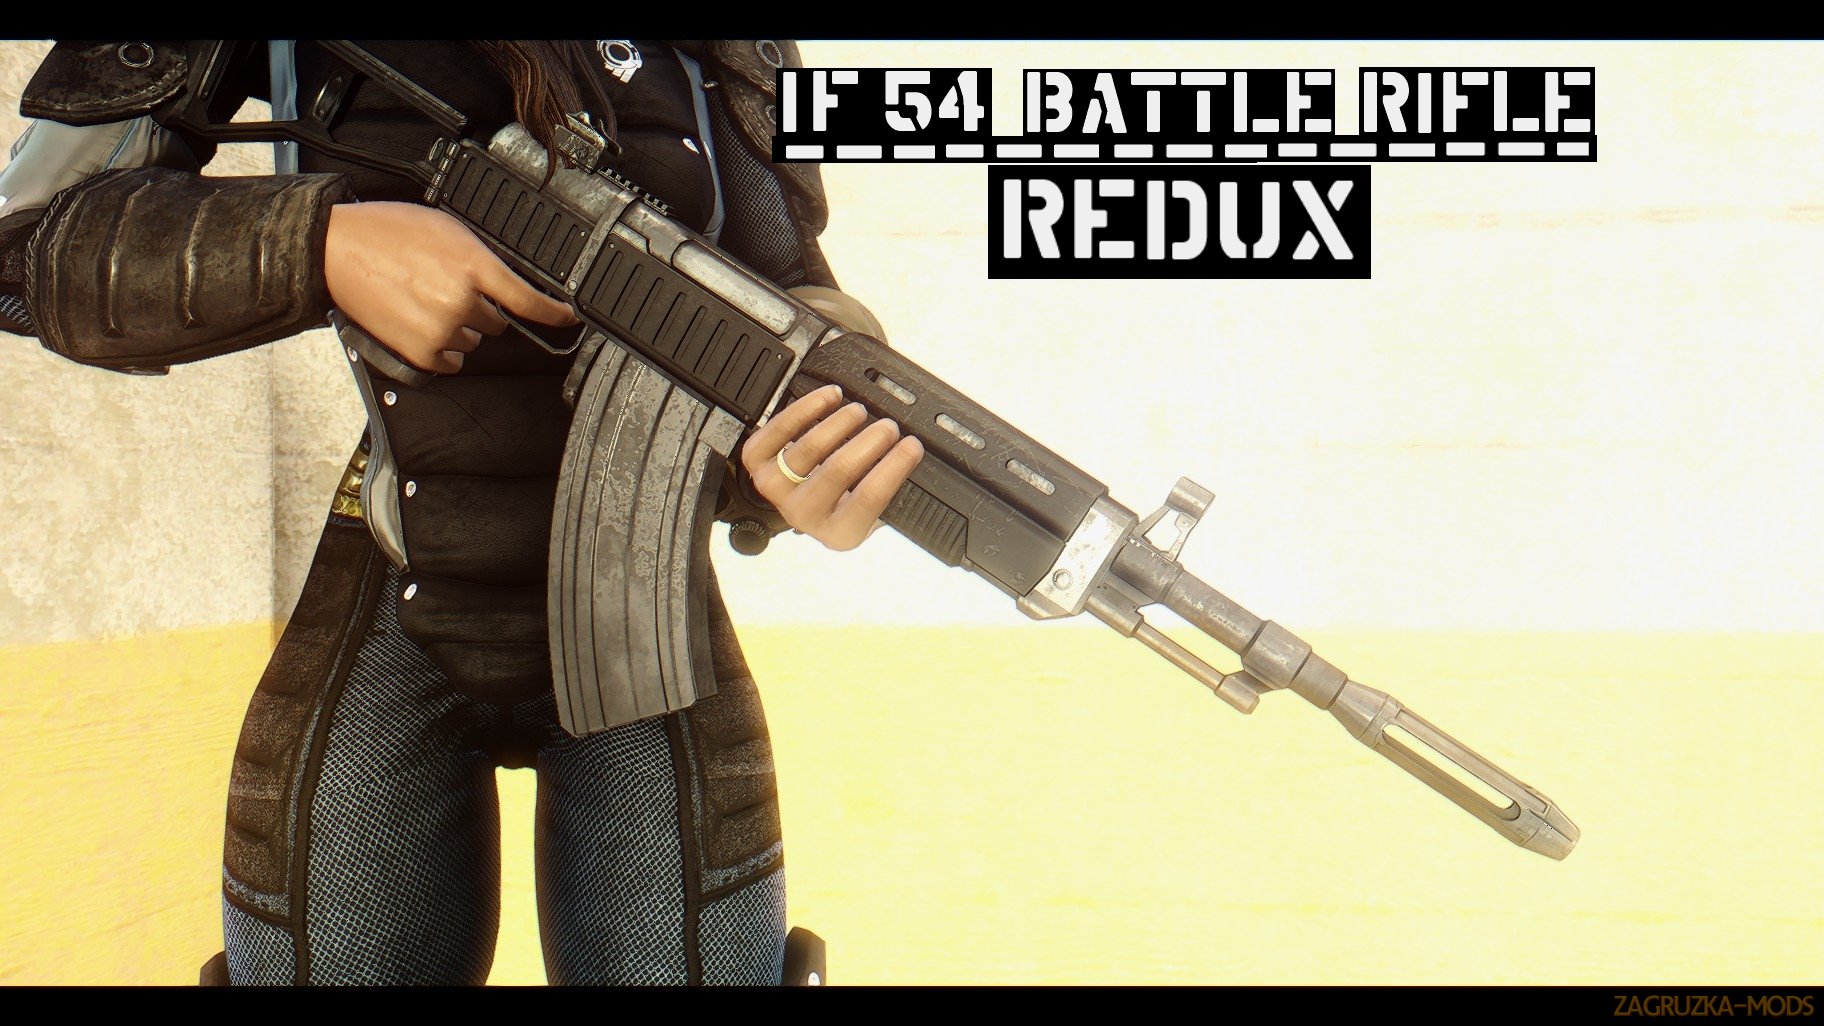 IF-54 Battle Rifle REDUX v1.0 by Skibadaa for Fallout 4